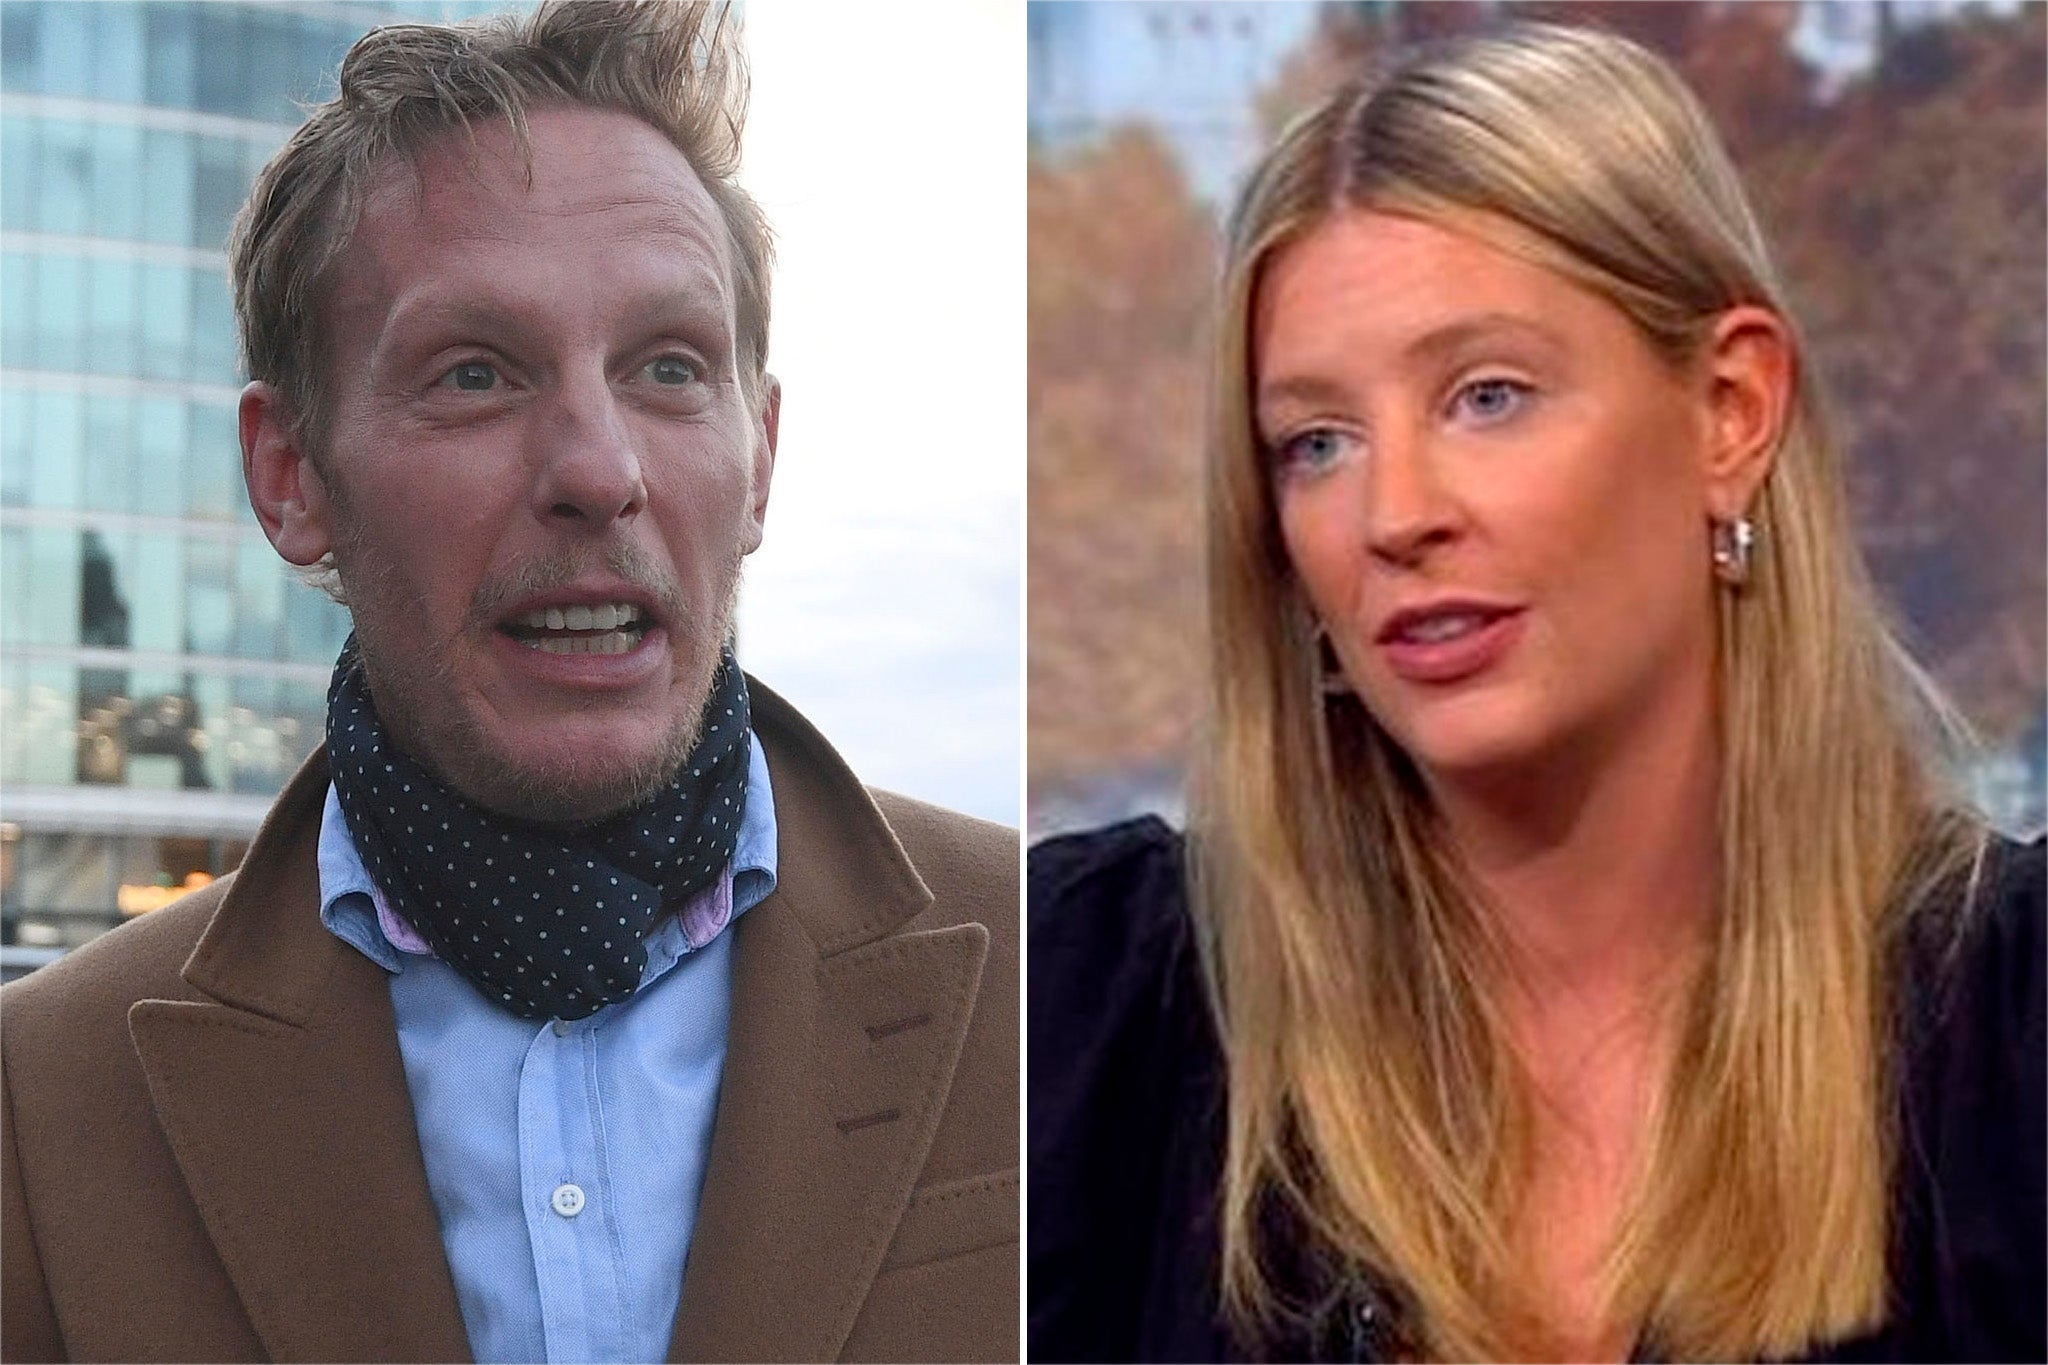 Laurence Fox was suspended from GB News after saying of Ava Evans: ‘Who’d want to shag that?’